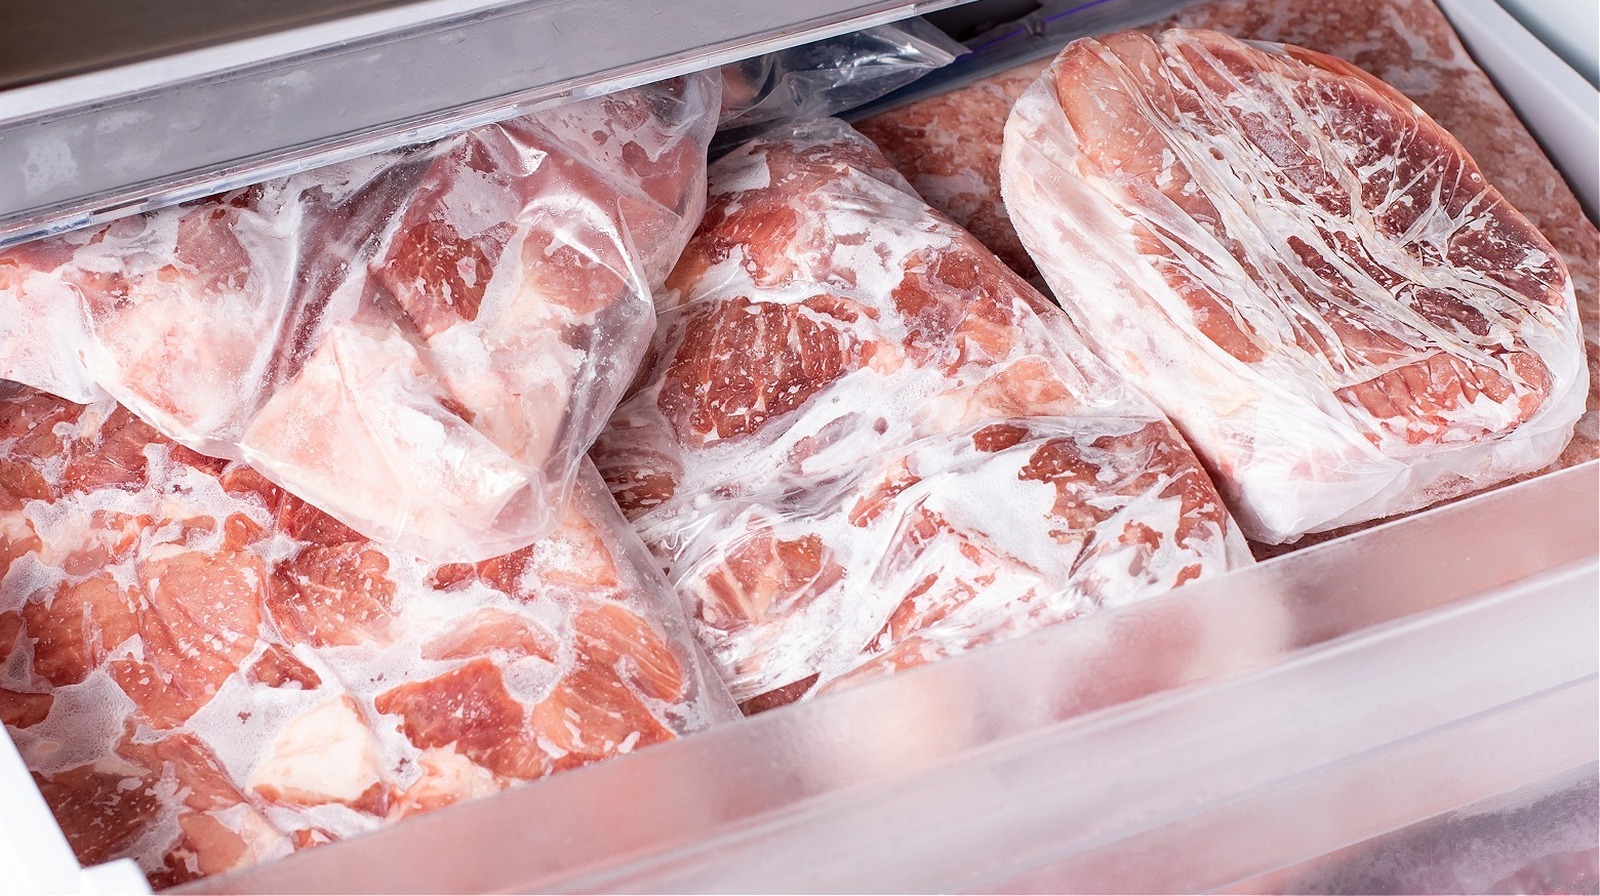 The best way to freeze fresh meat